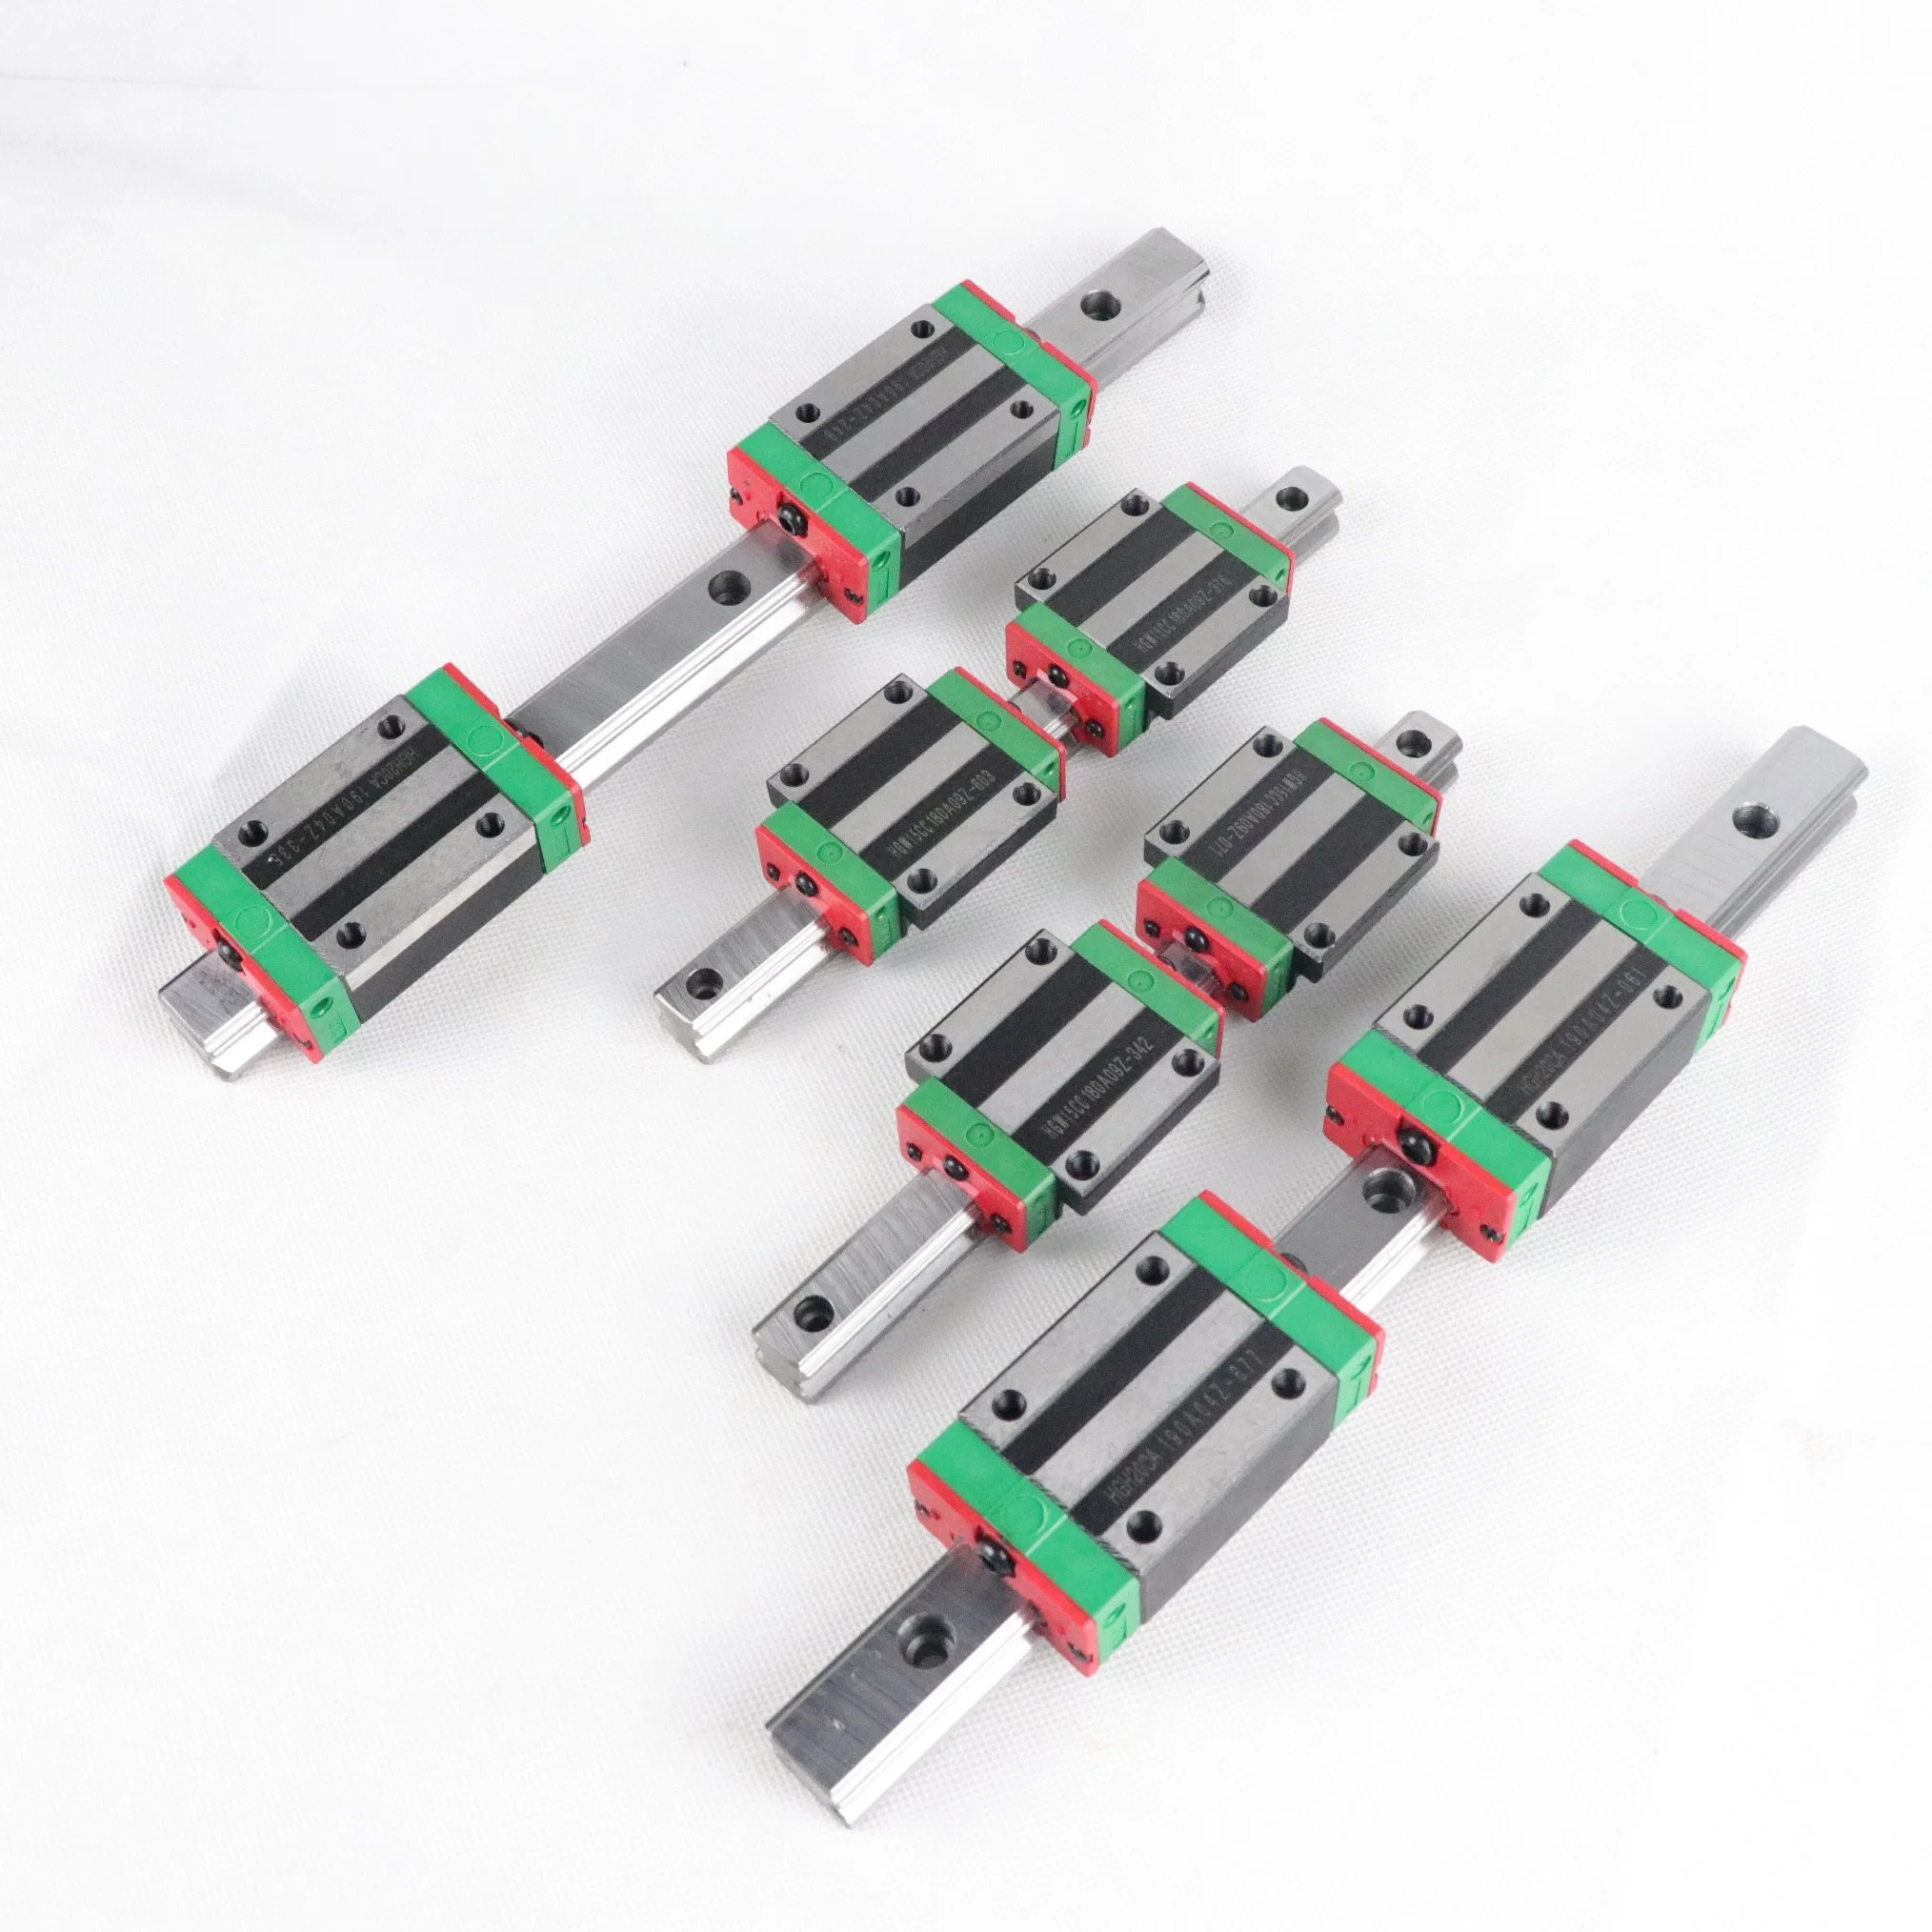 Actuated Linear Slide for CNC Cutting Machine Guide Rails